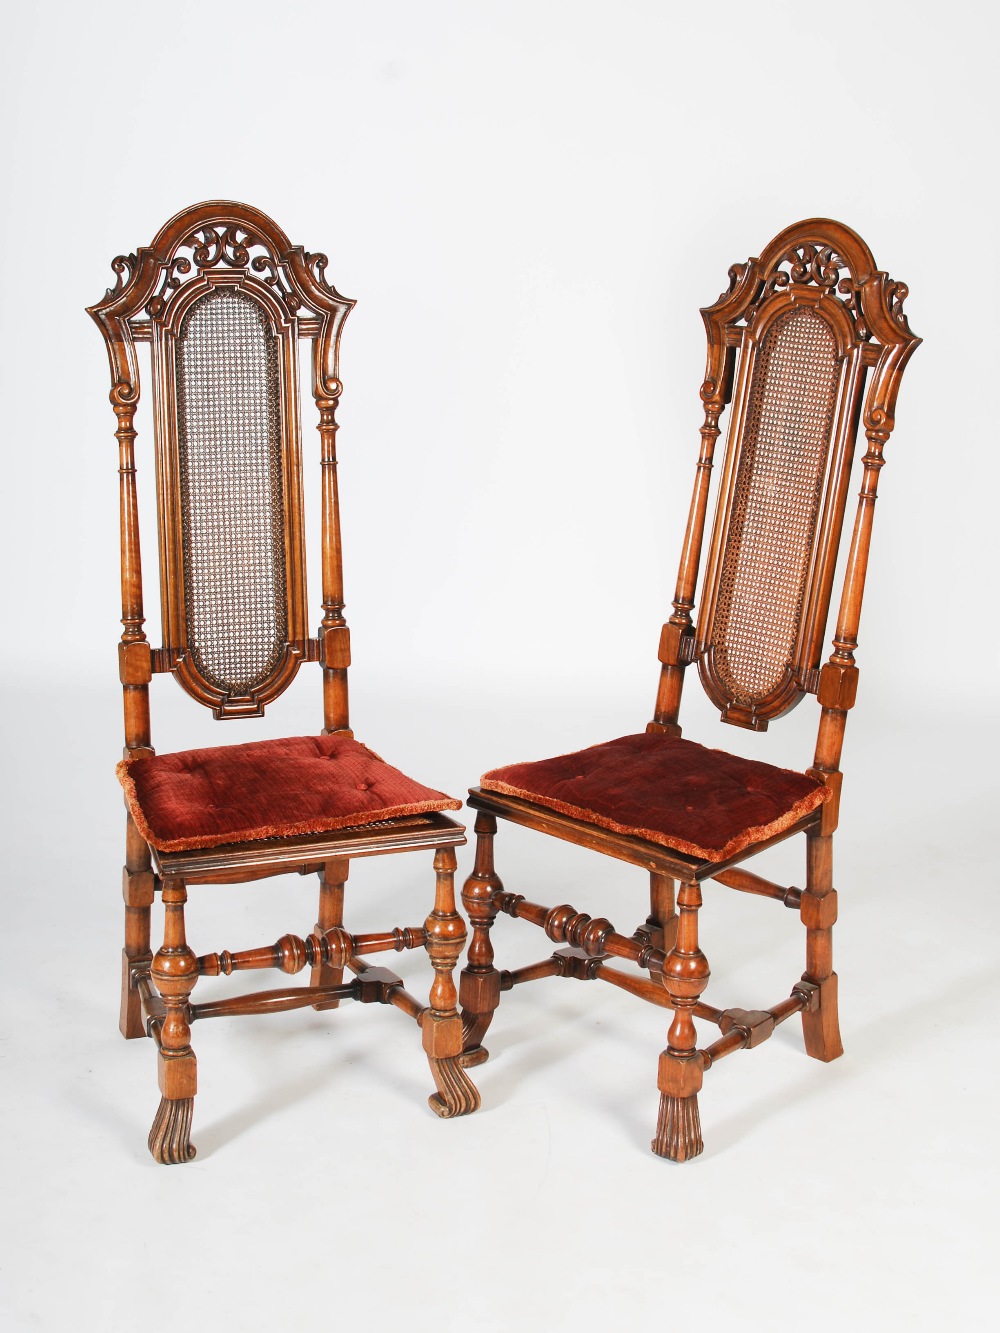 A pair of late 19th/early 20th century Continental walnut hall chairs, the upright backs with